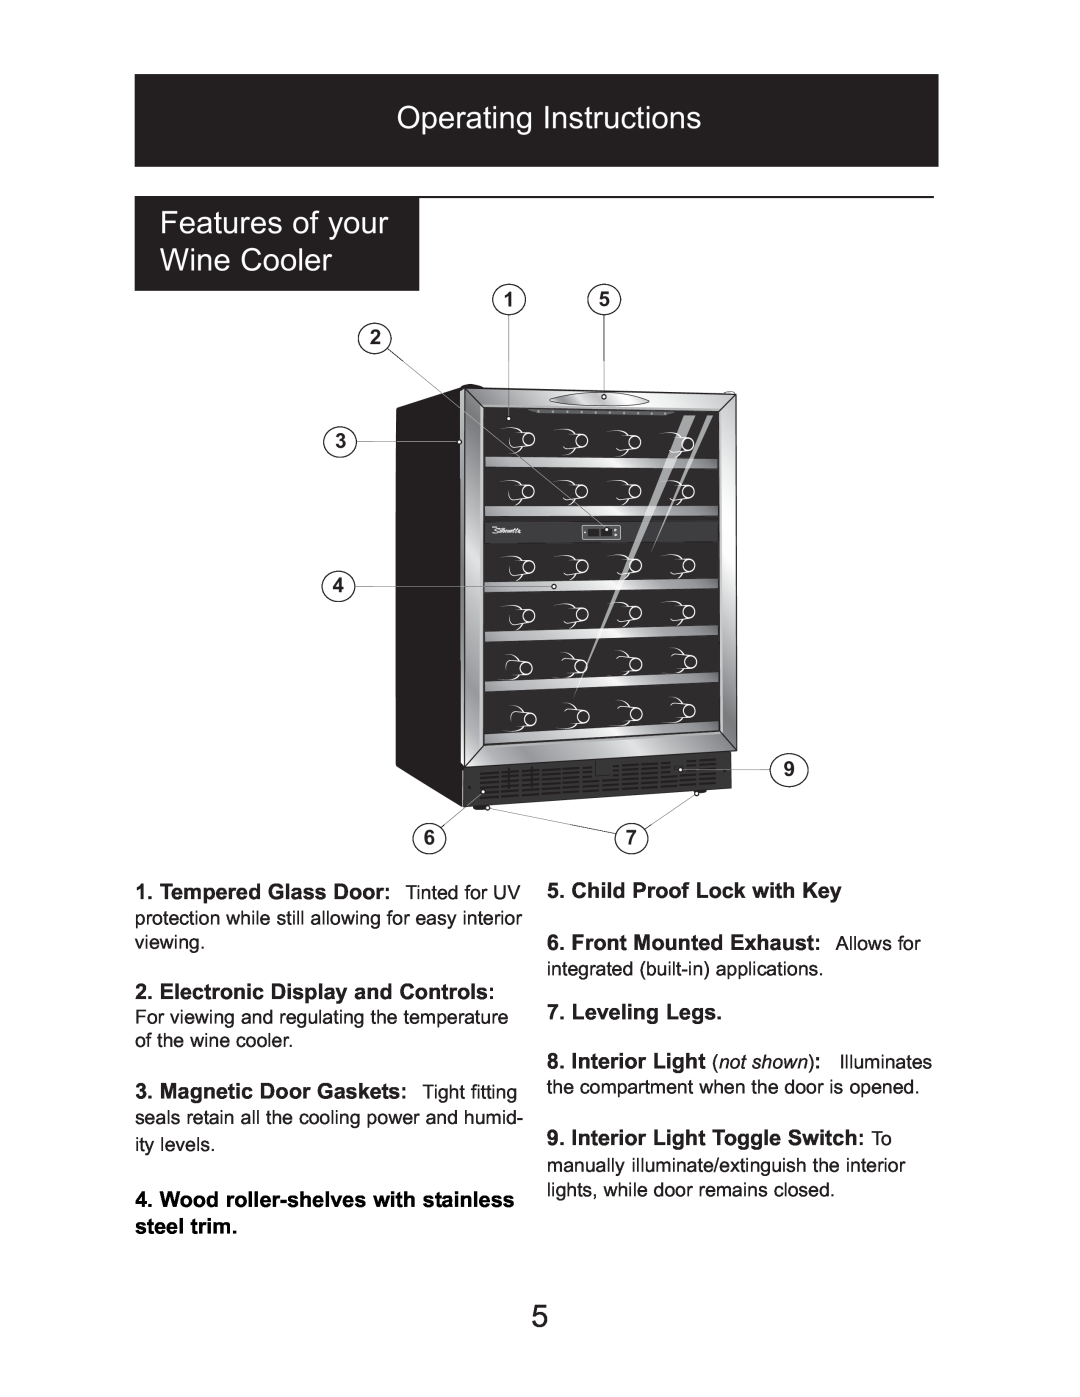 Danby DWC518BLS Operating Instructions Features of your Wine Cooler, Wood roller-shelves with stainless steel trim 